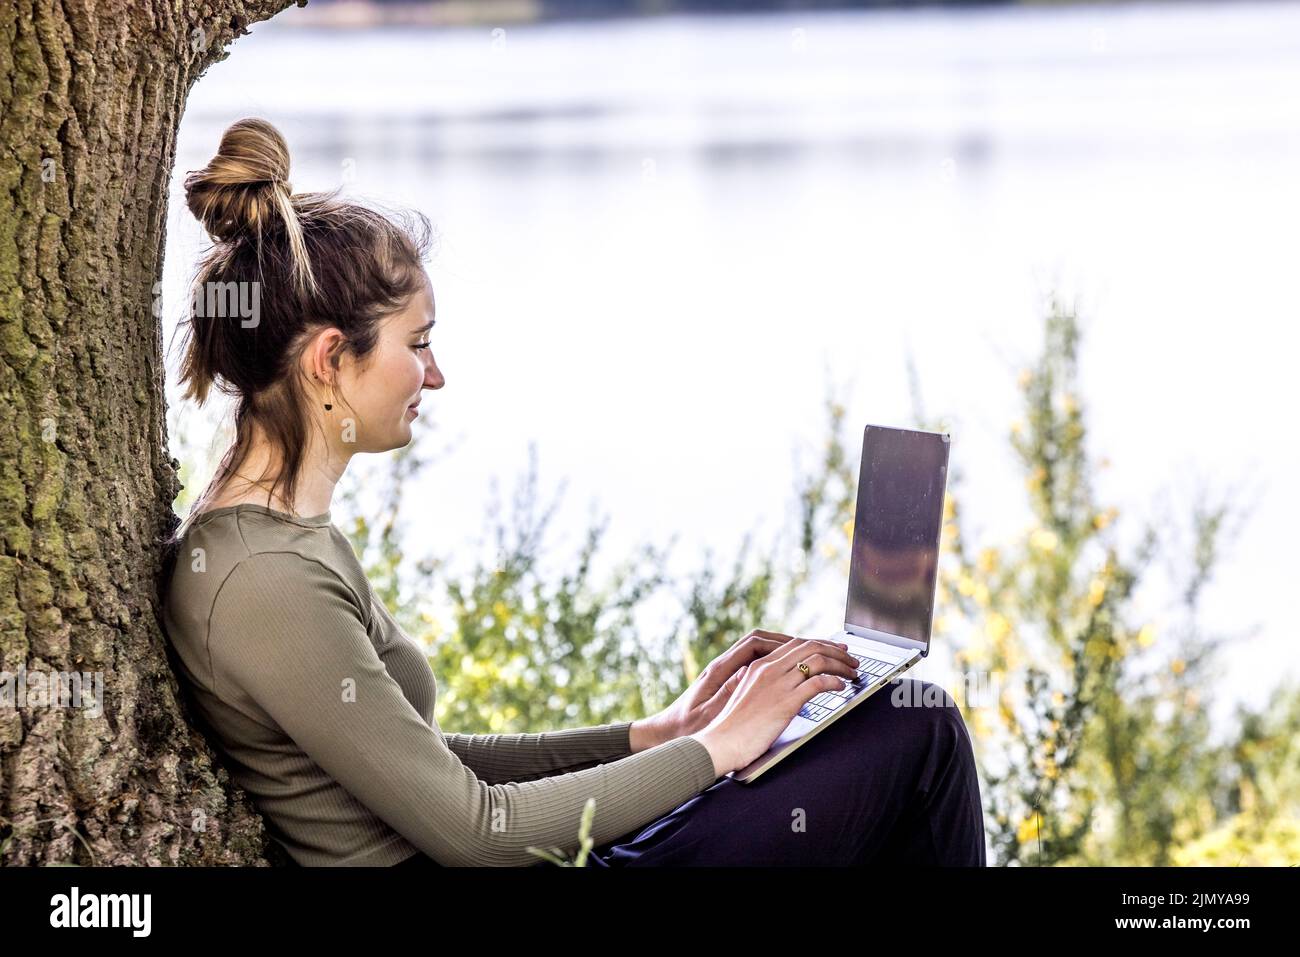 Work from anywhere. Remote freelancer work in nature using renewable energy via a foldable solar panel. Young woman, female free Stock Photo